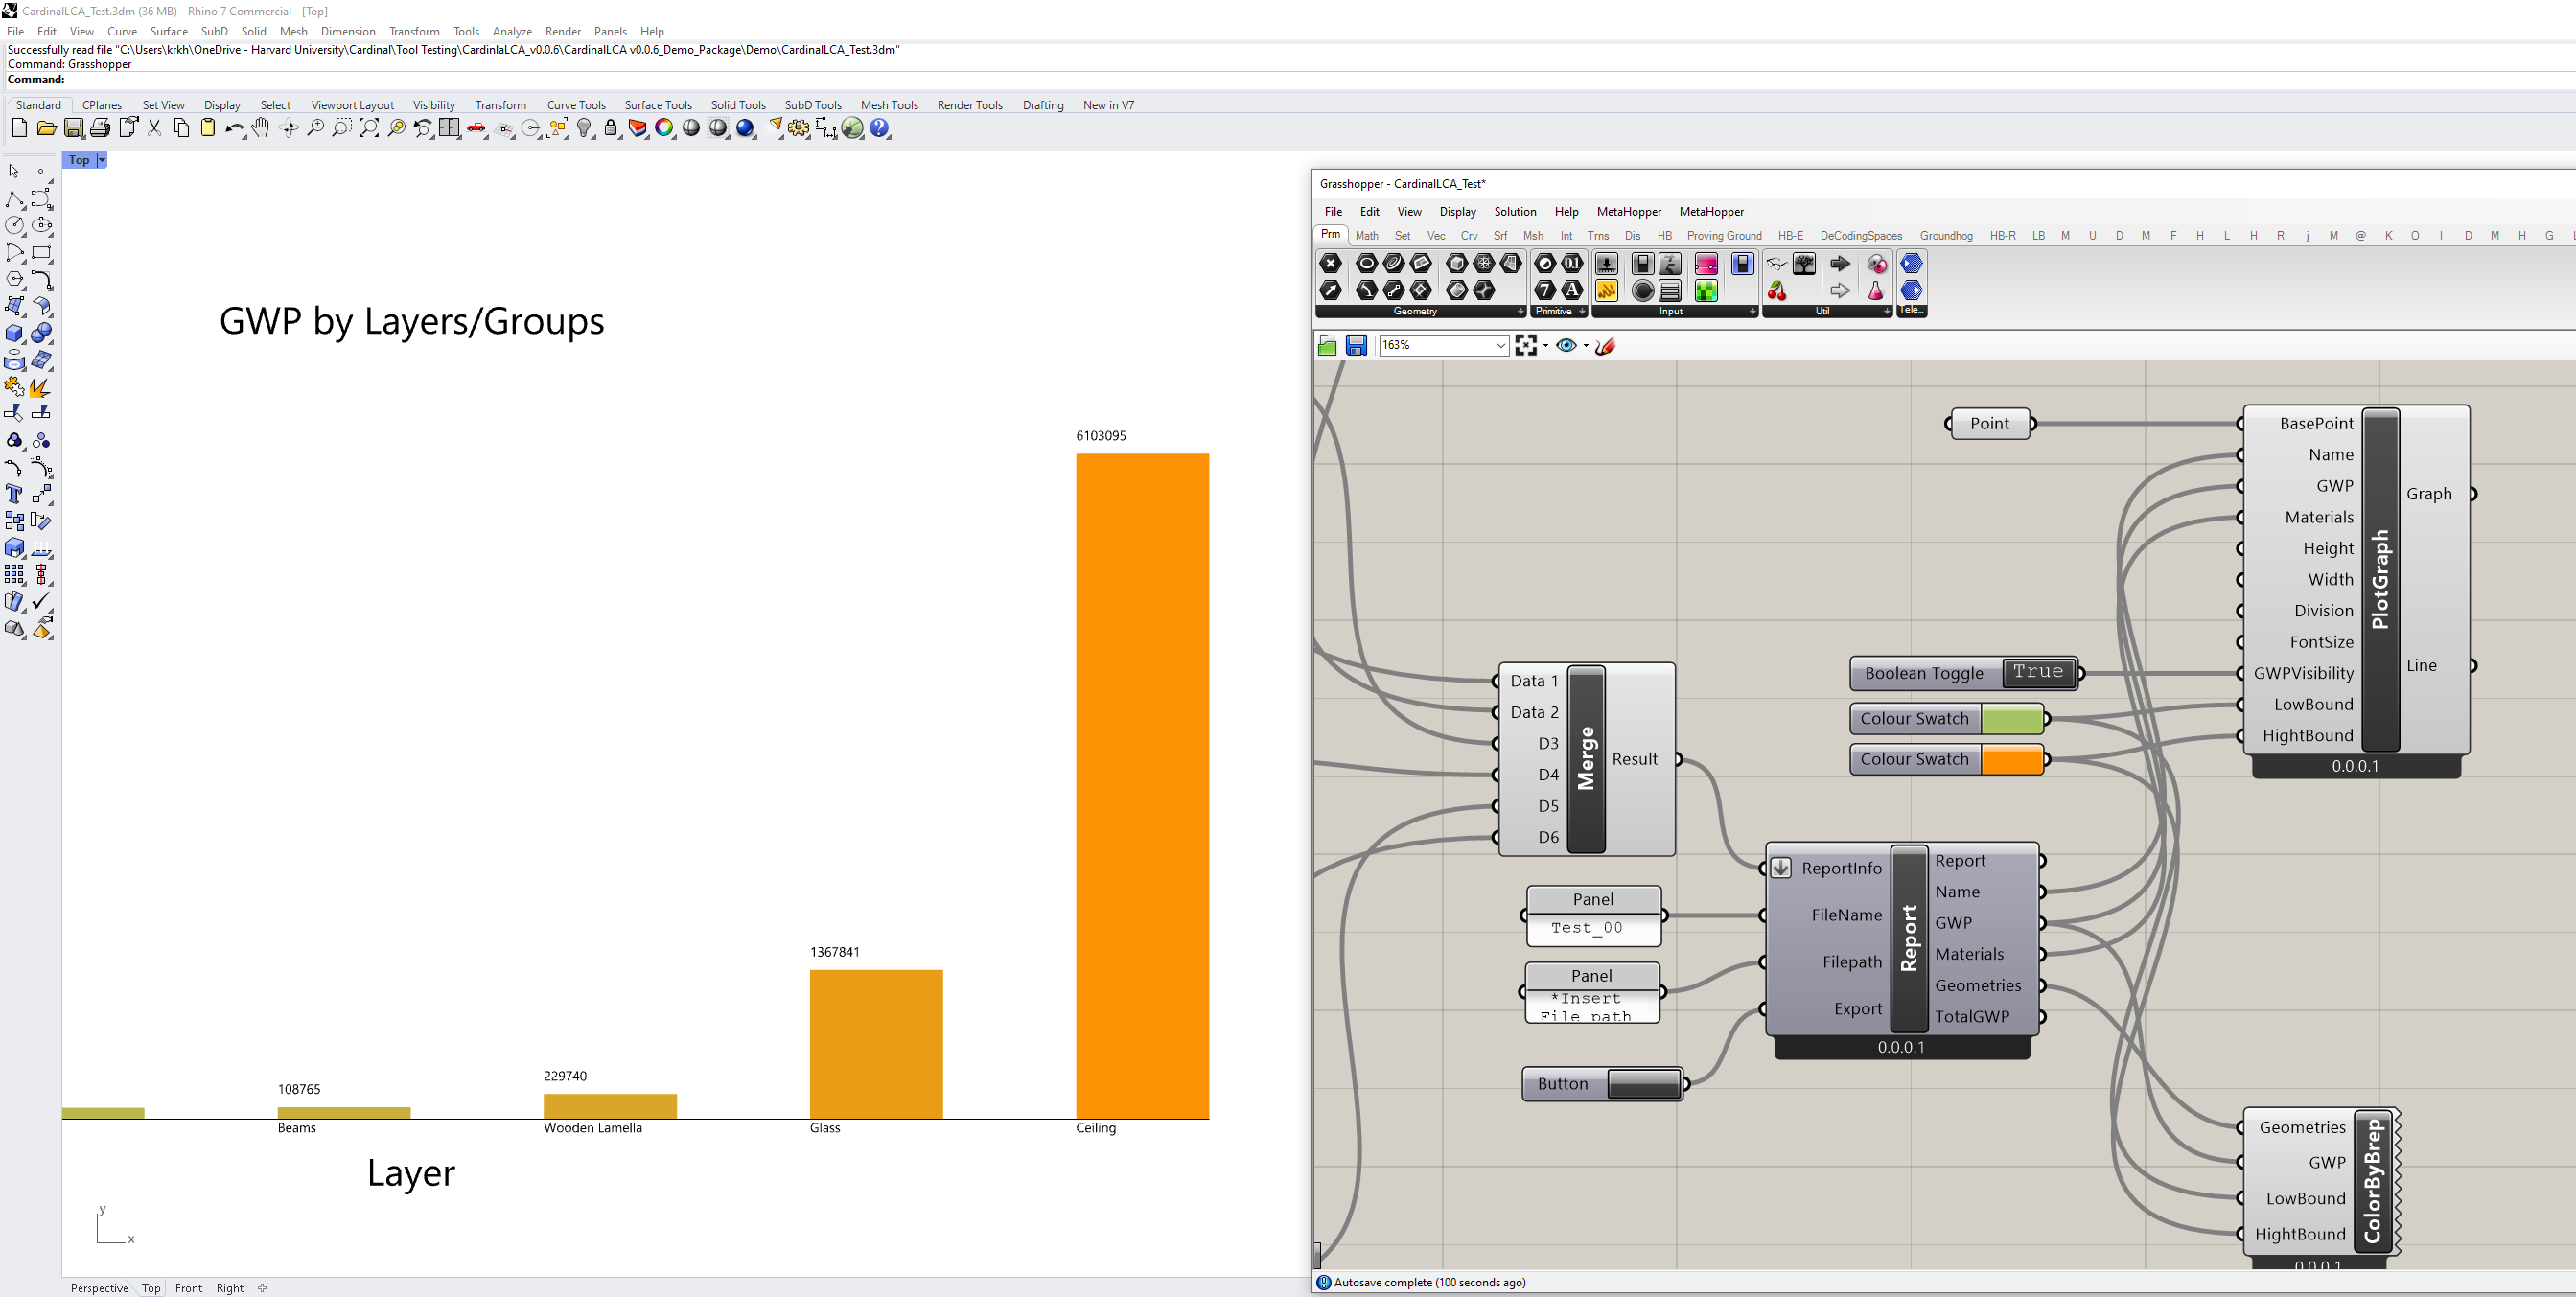 Screenshot of the plugin showing BWP by layers/groups.